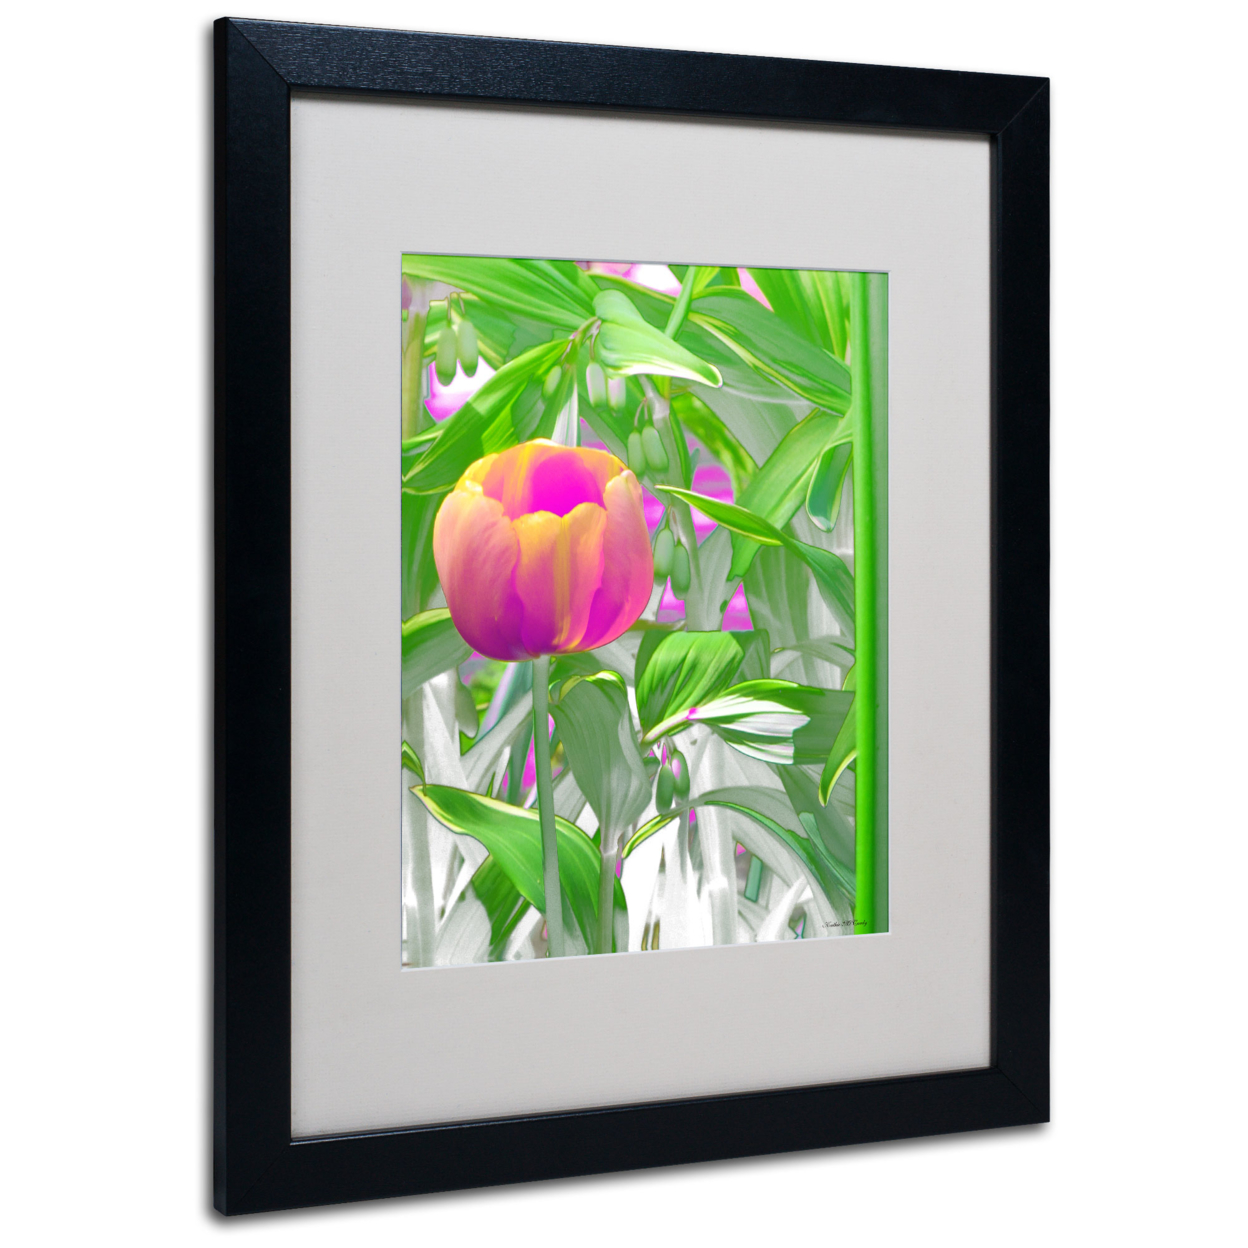 Kathie McCurdy 'Hot Tropic' Black Wooden Framed Art 18 X 22 Inches